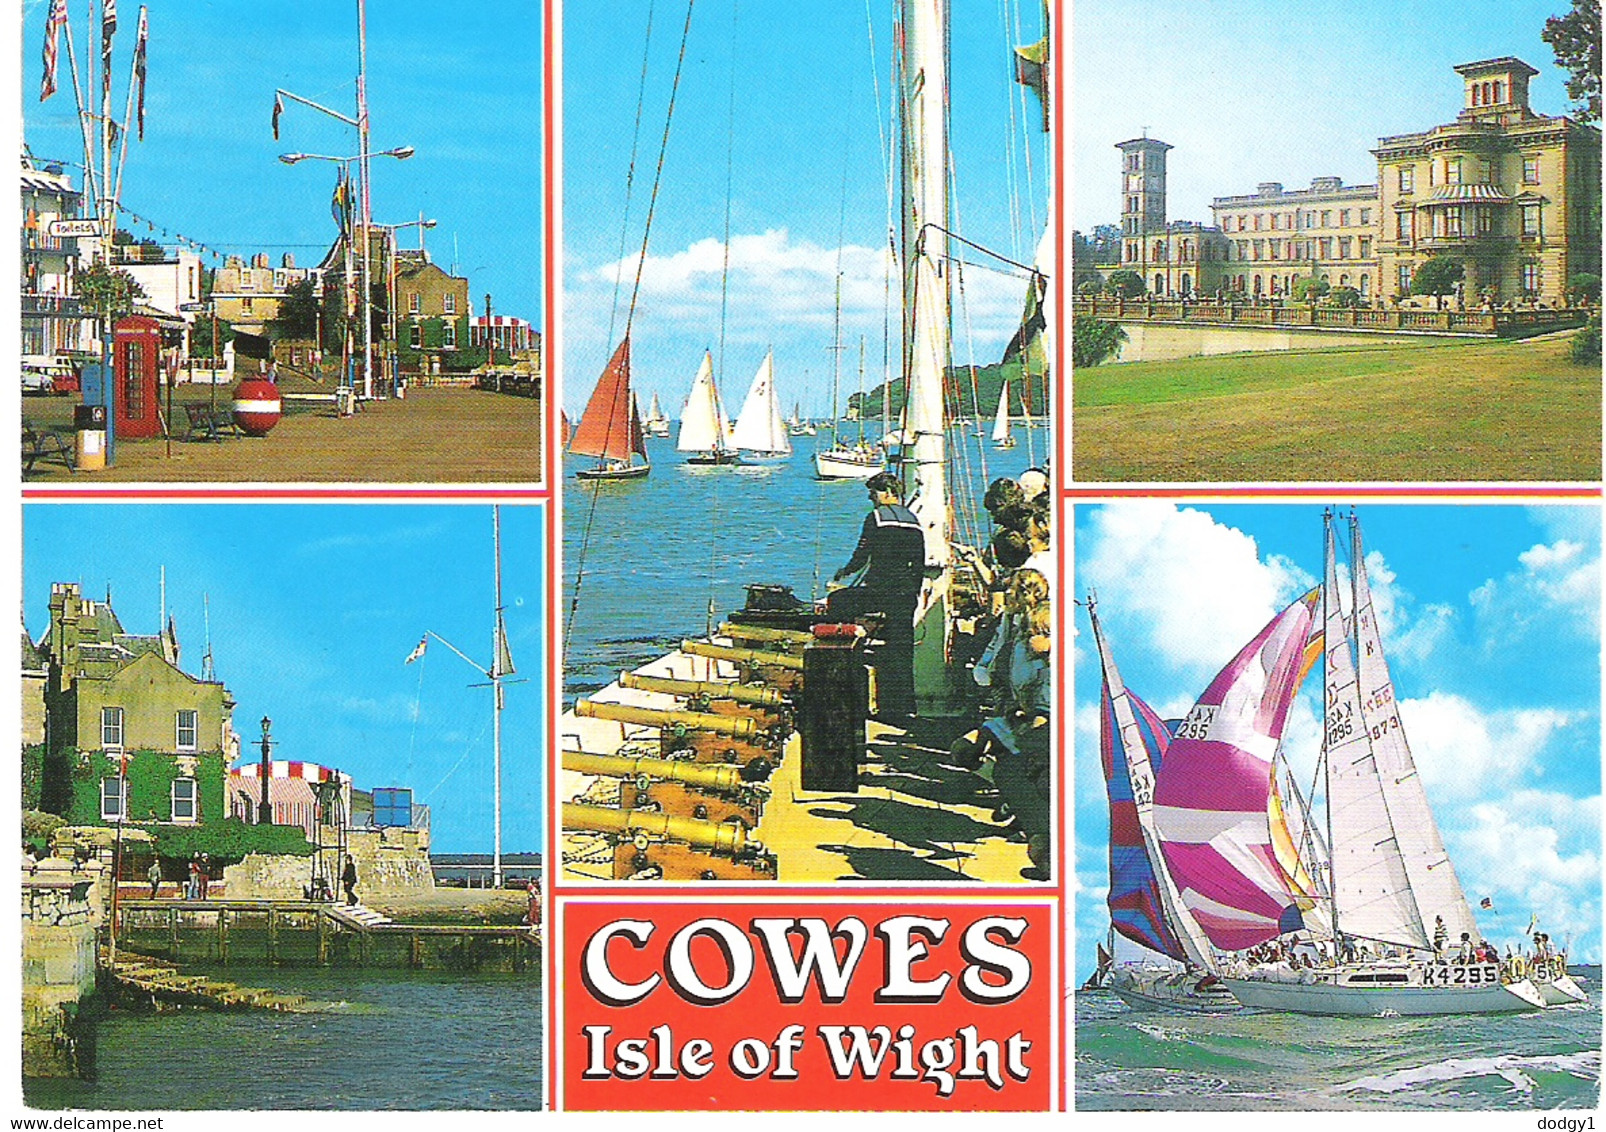 SCENES FROM COWES, ISLE OF WIGHT, ENGLAND. USED POSTCARD Jo9 - Cowes